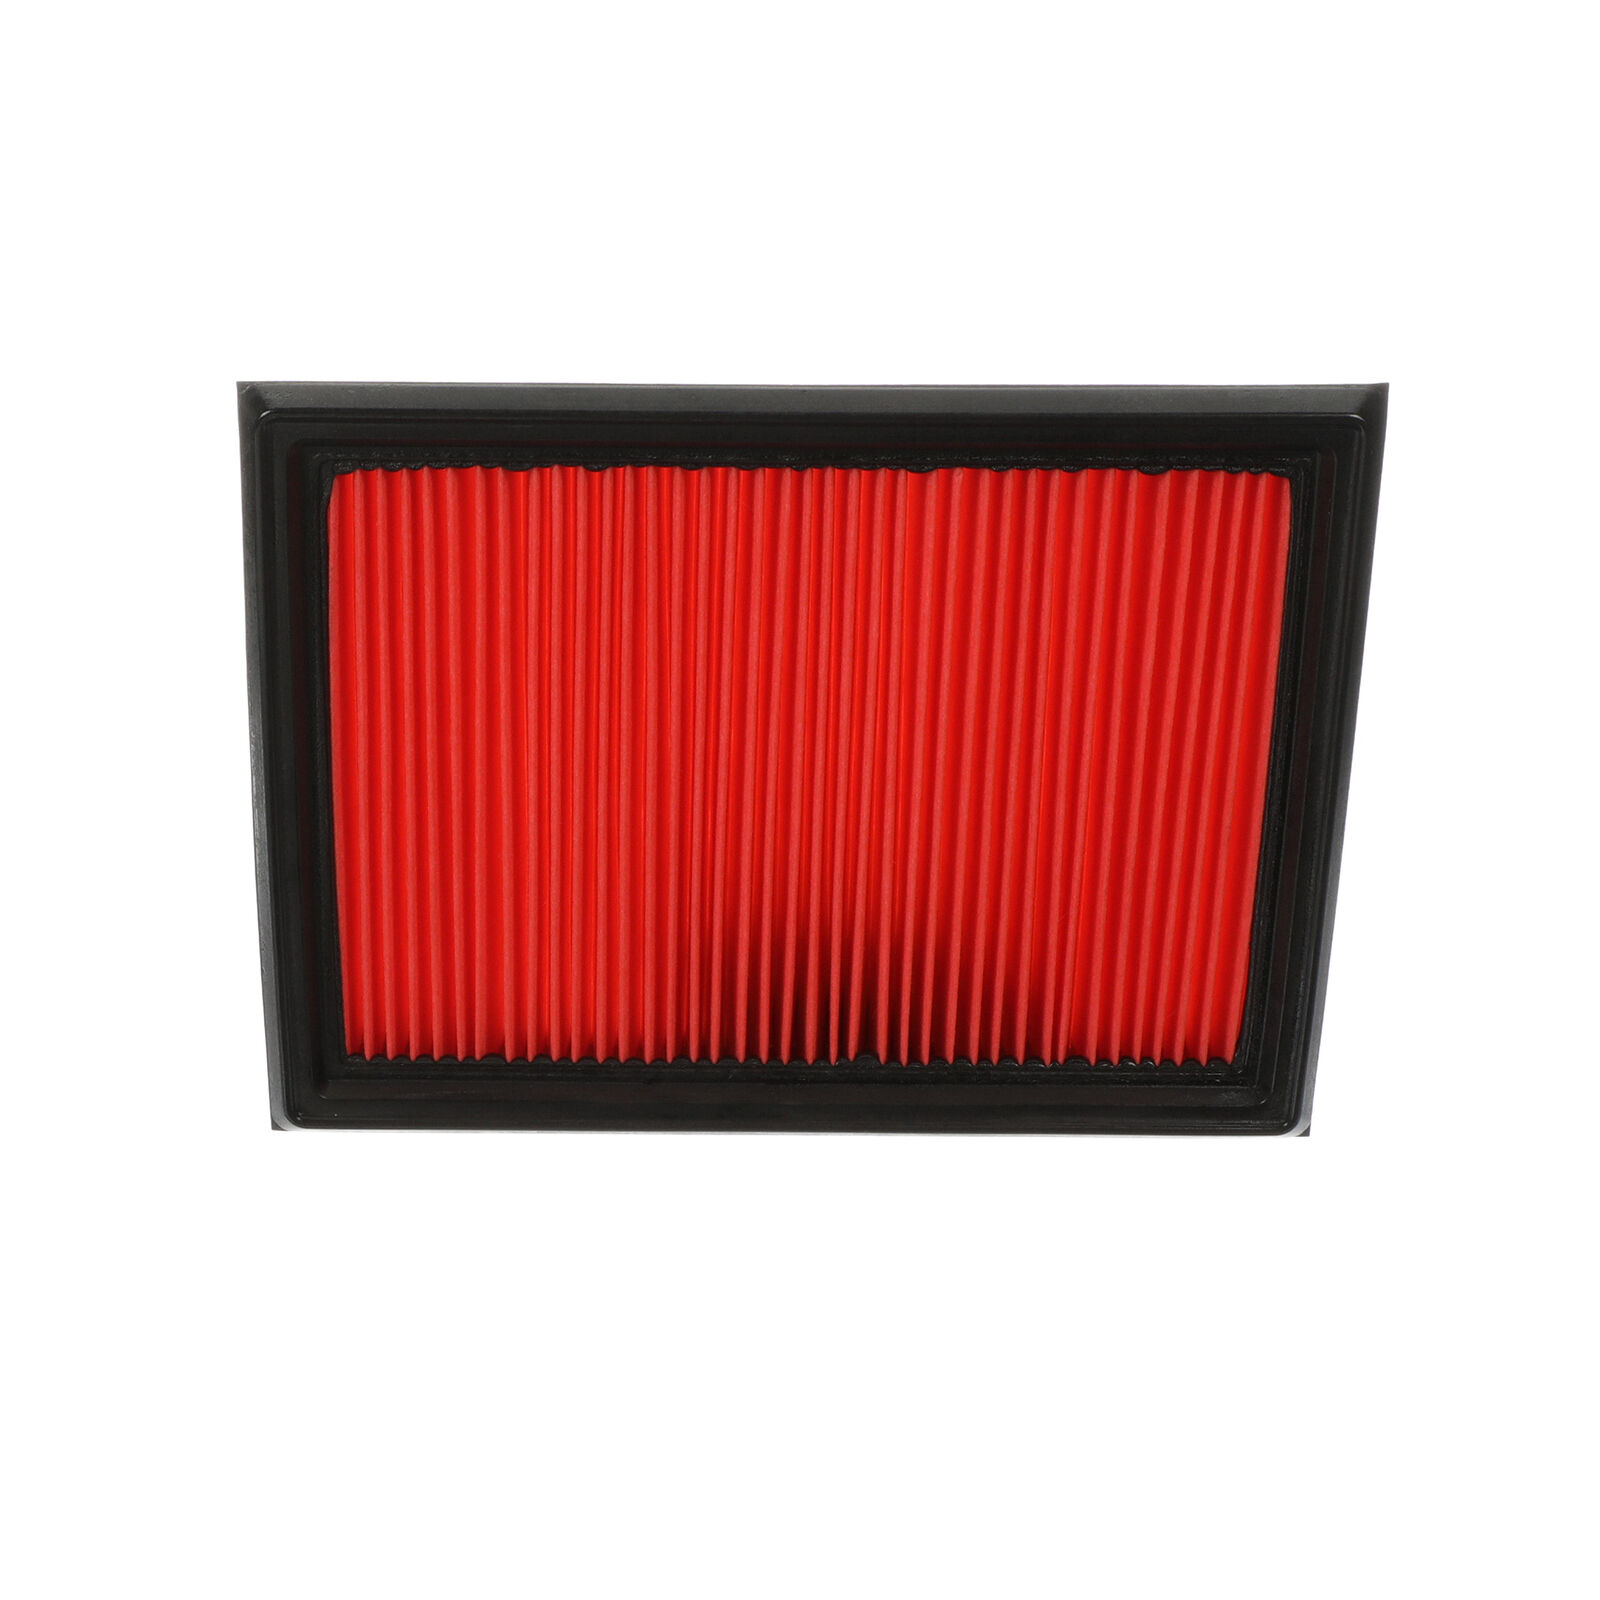 NEW OEM 1990-1996 and 2007-2018 Nissan Air Filter Element 16546-30P00 300ZX Juke